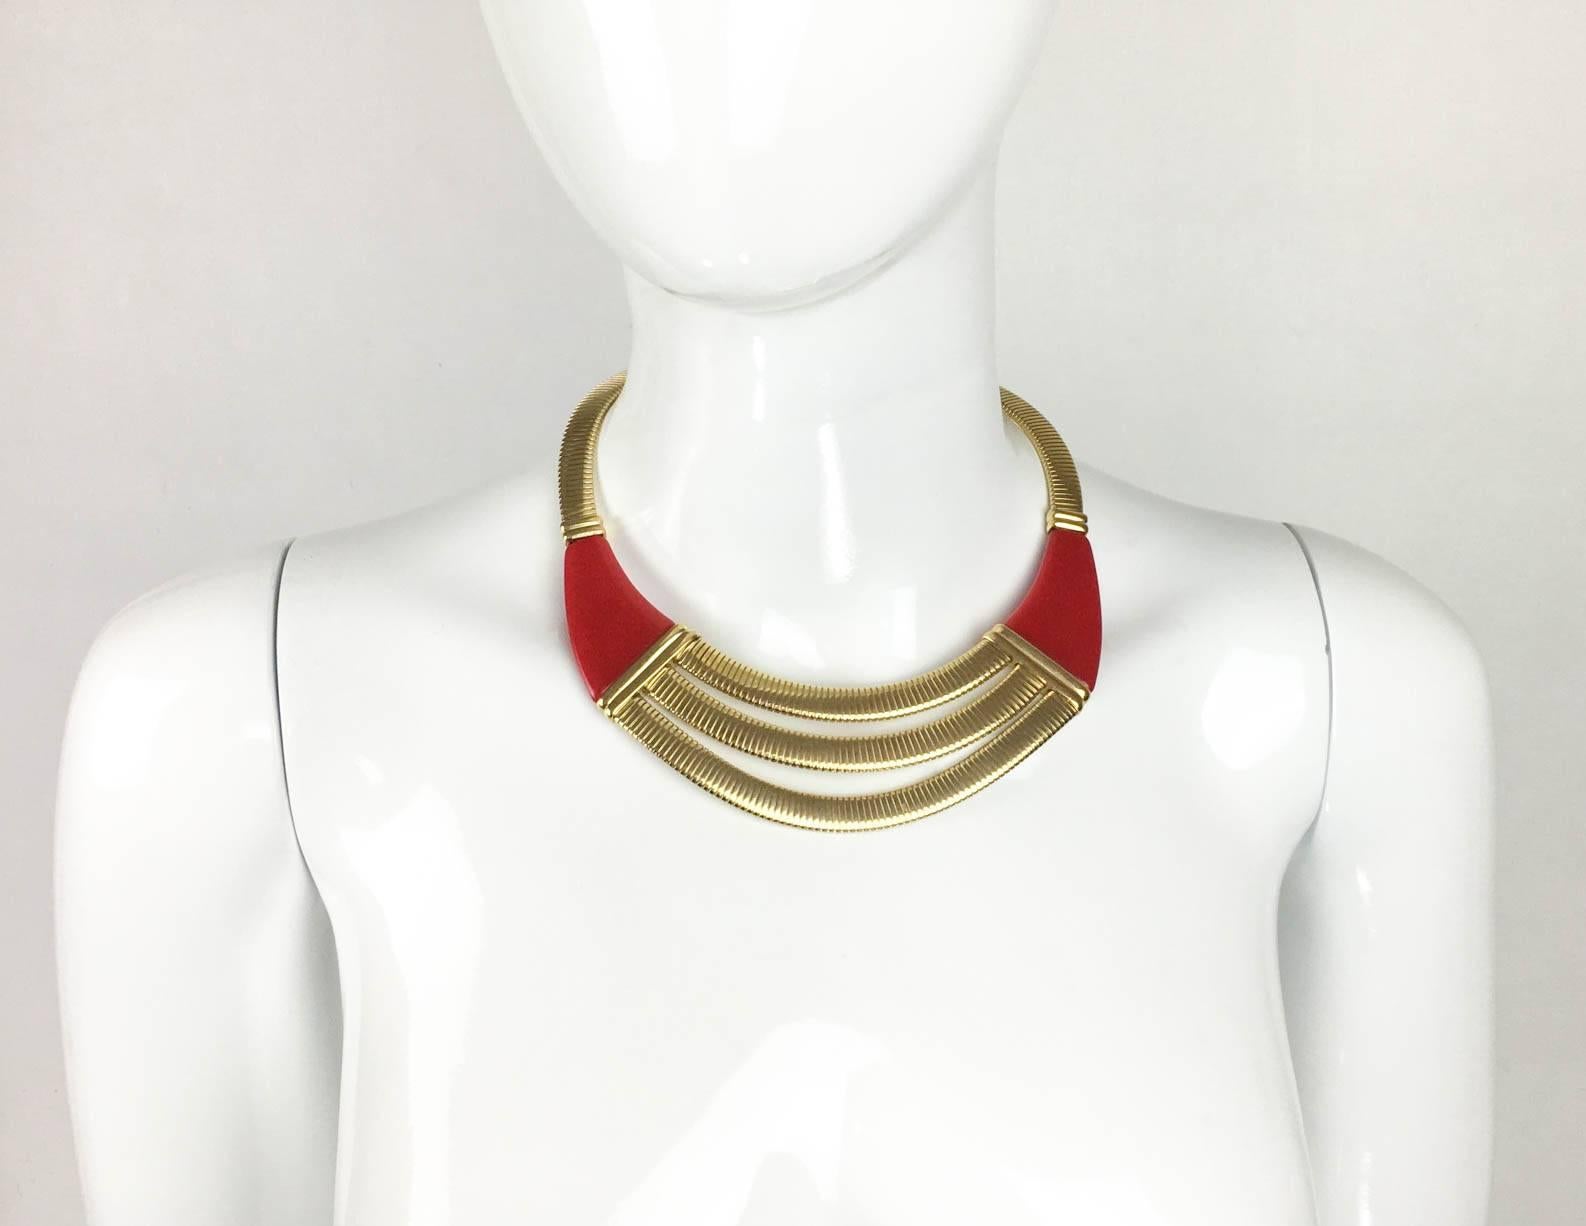 Stylish Vintage Givenchy Necklace. This striking piece by Givenchy is made in gilt metal and red resin. Dating back from the 1970s, the design is Art Deco inspired. Signed ‘Givenchy Paris – New York’ on the back of the clasp. This is a great piece